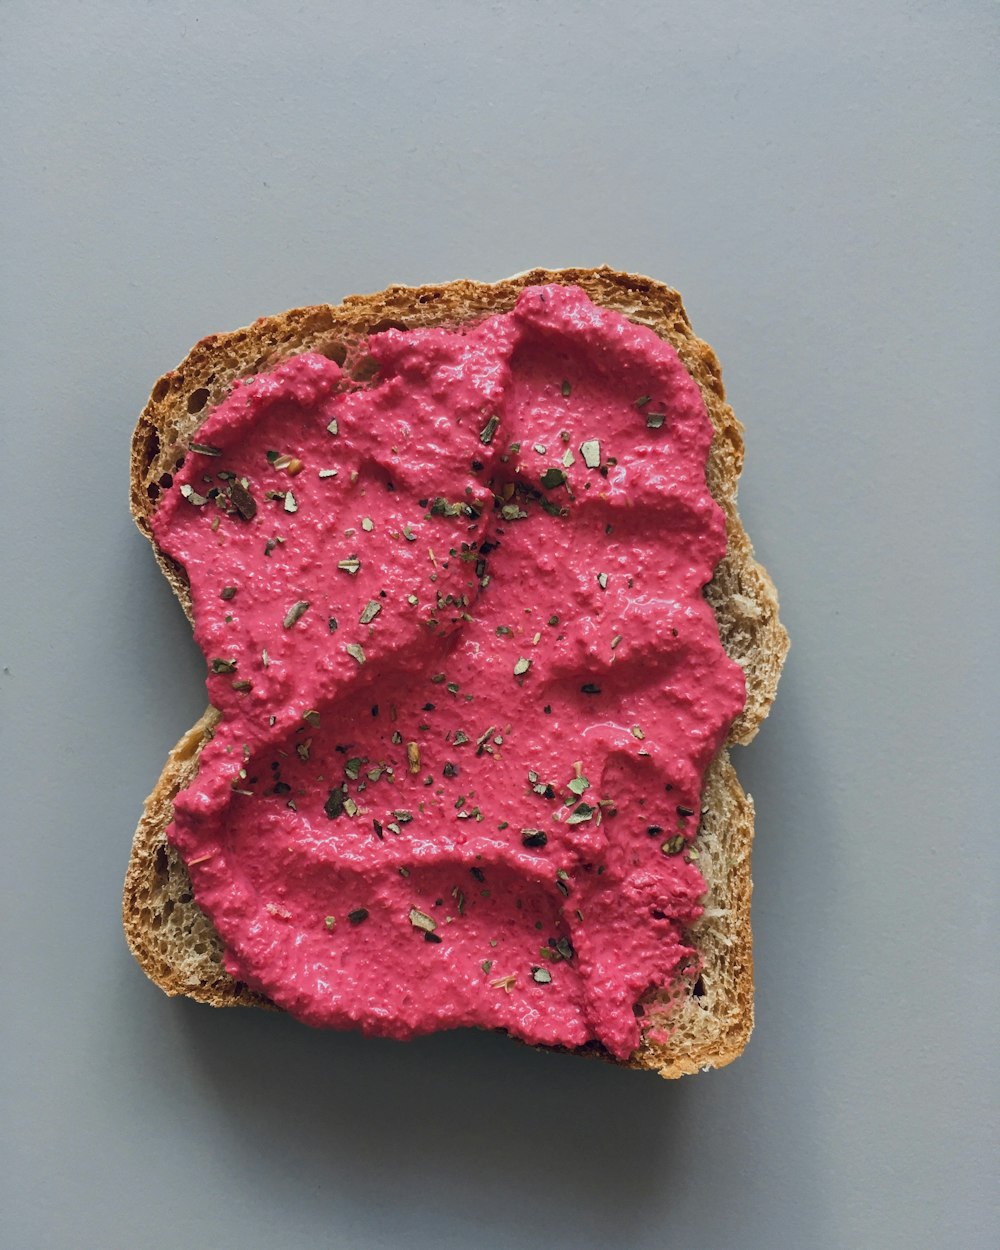 a piece of bread with a pink substance on it